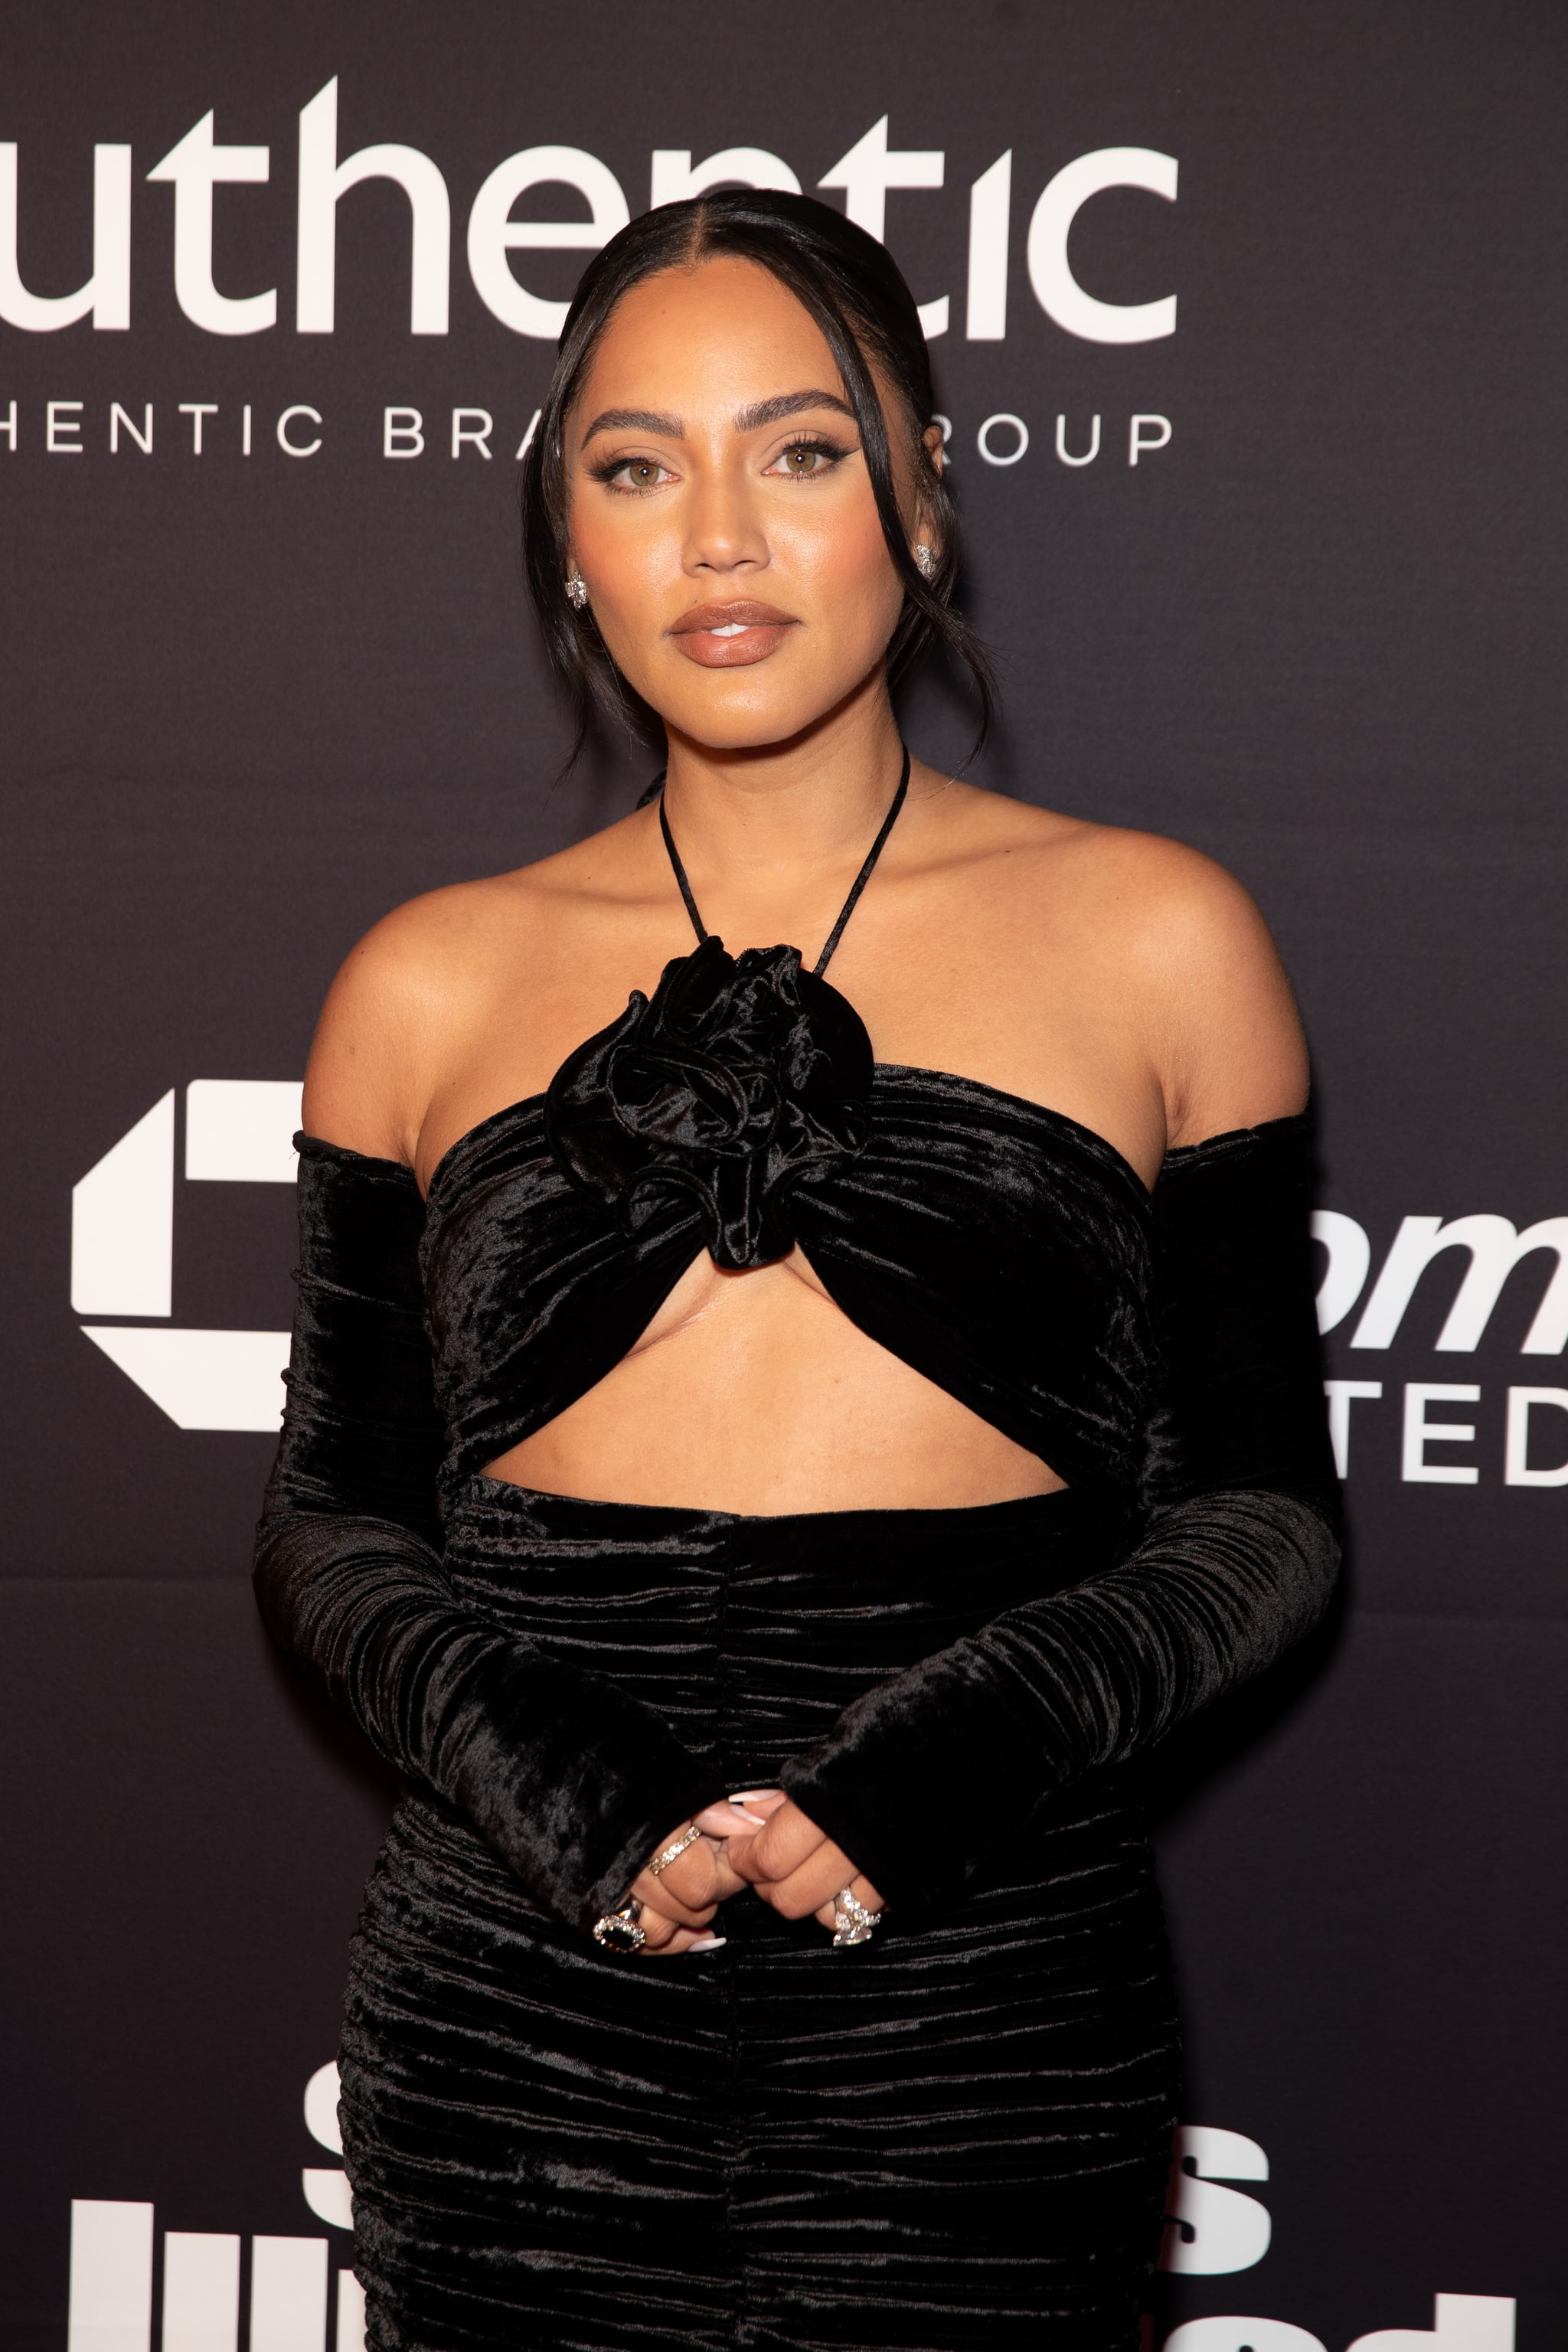 SAN FRANCISCO, CALIFORNIA - DECEMBER 08: Ayesha Curry arrives at 2022 Sports Illustrated Sportsperson Of The Year Awards at The Regency Ballroom on December 08, 2022 in San Francisco, California. (Photo by Miikka Skaffari/Getty Images)